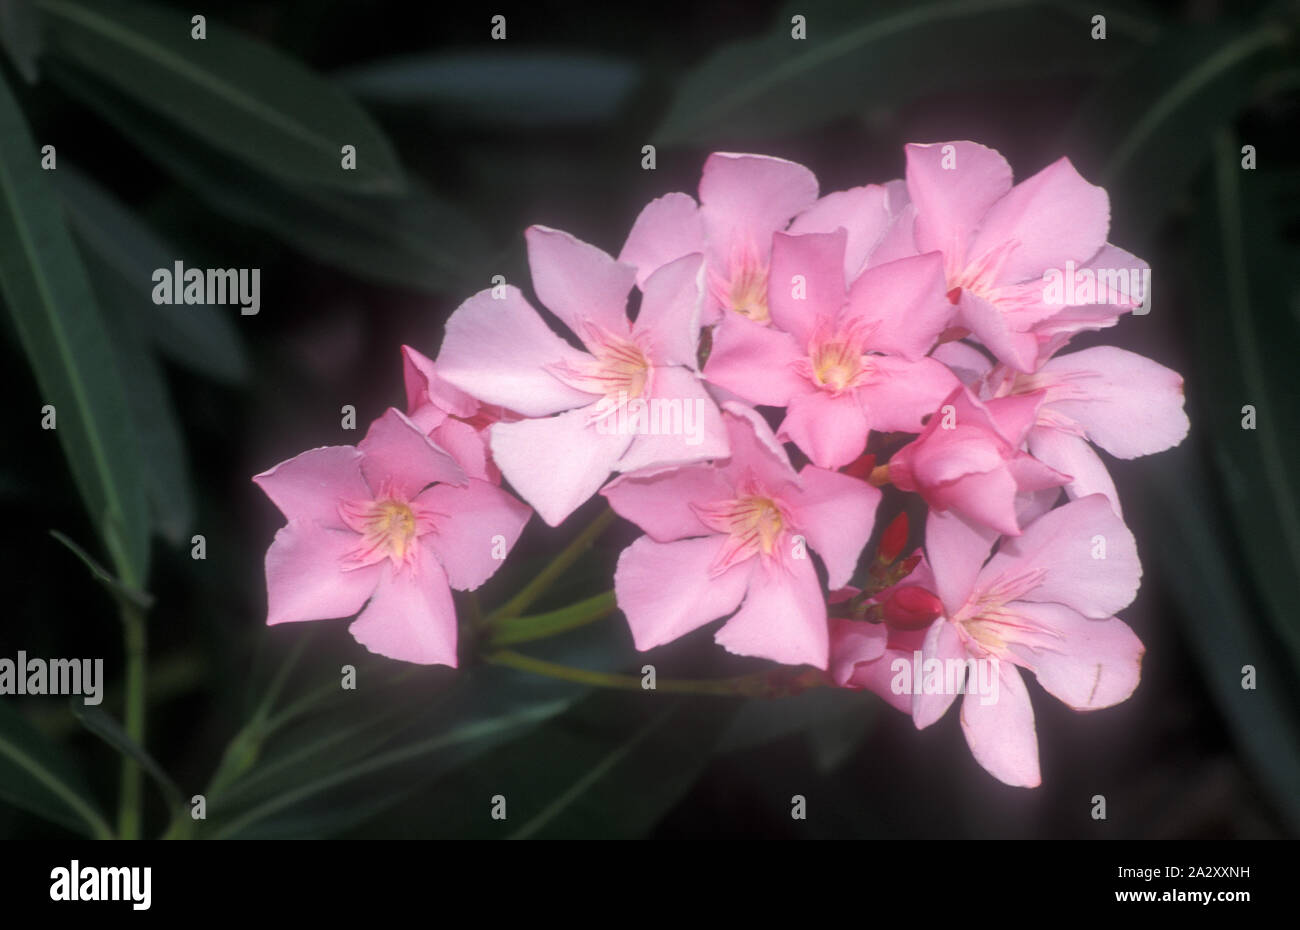 Nerium oleander is a shrub or small tree in the dogbane family Apocynaceae, toxic in all its parts. Stock Photo